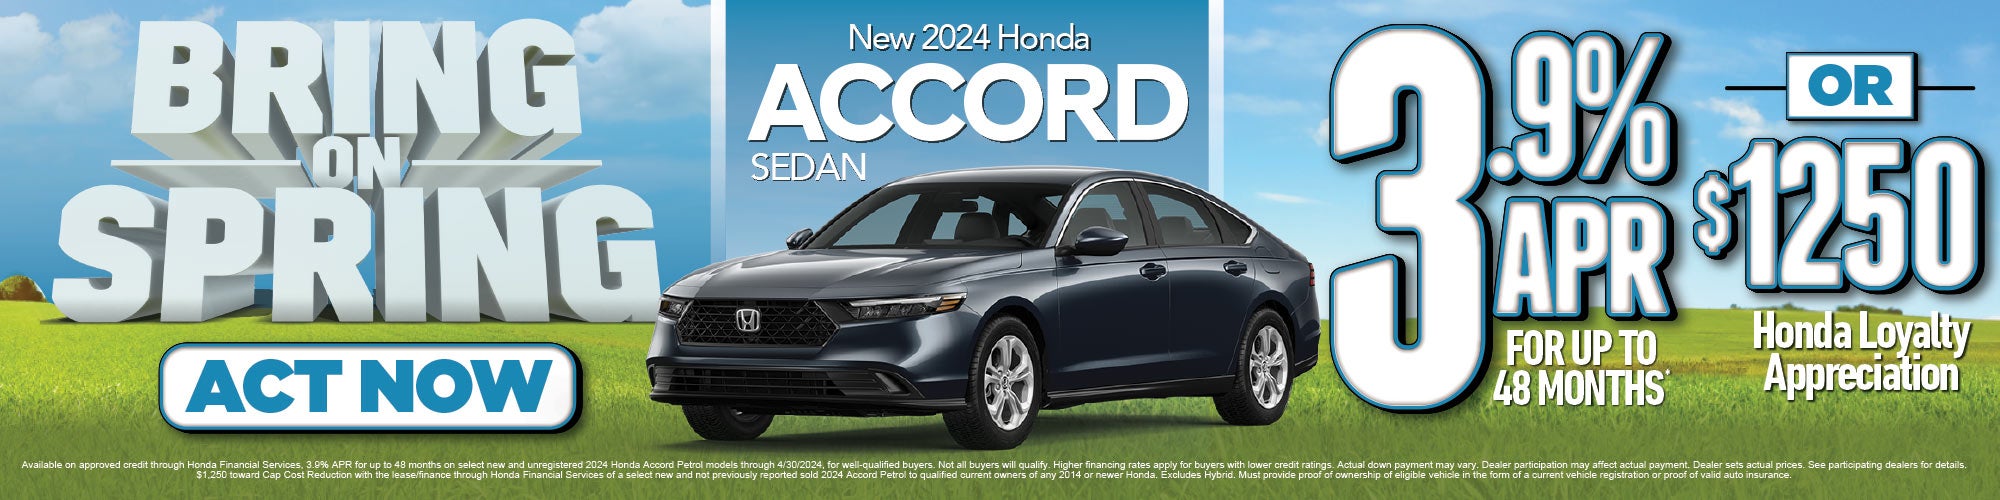 2024 Honda Accord Sedan 3.9% APR for up to 48 months 